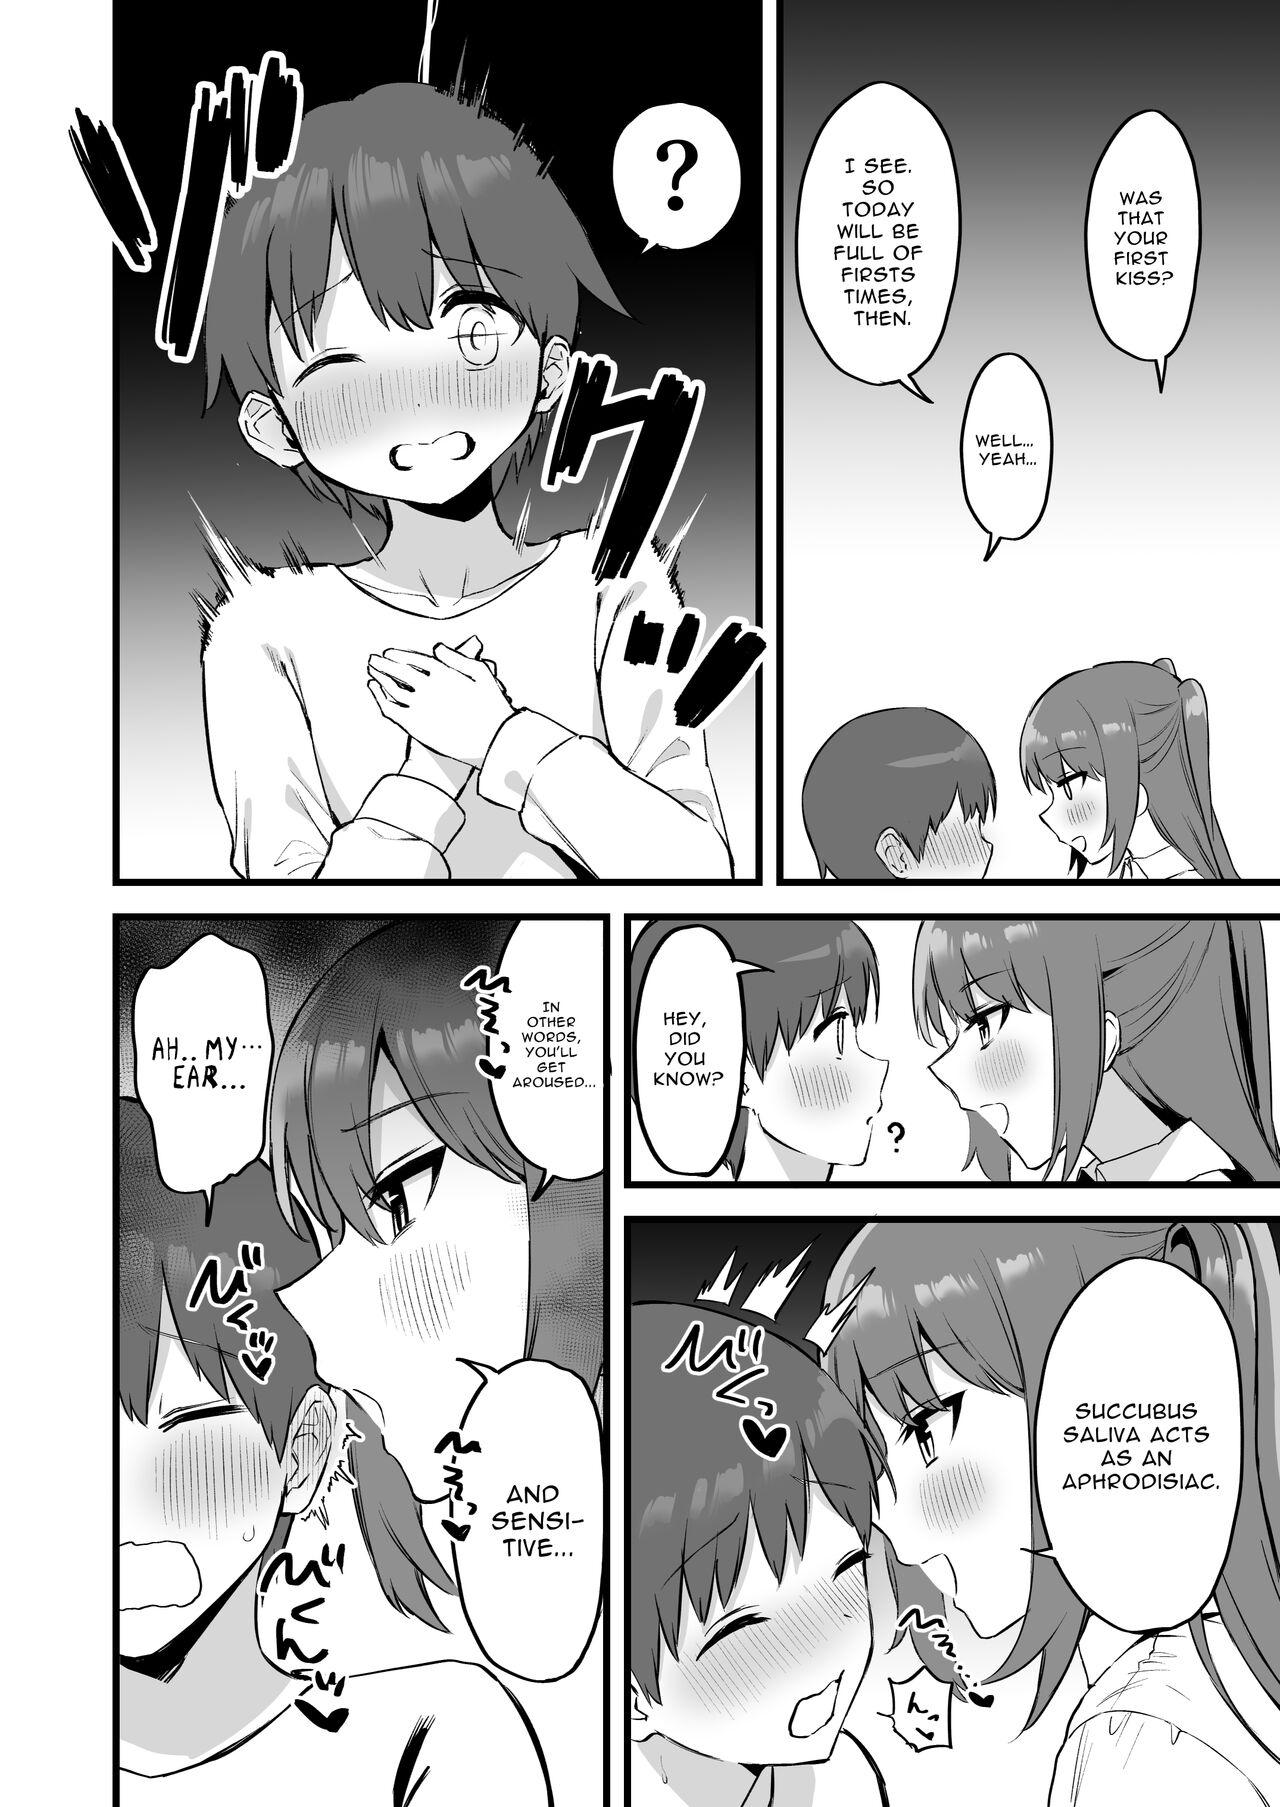 Gay Shorthair Onee-chan wa Succubus!? | The Older Girl In My Neighborhood Is A Succubus!? - Original Deflowered - Page 9